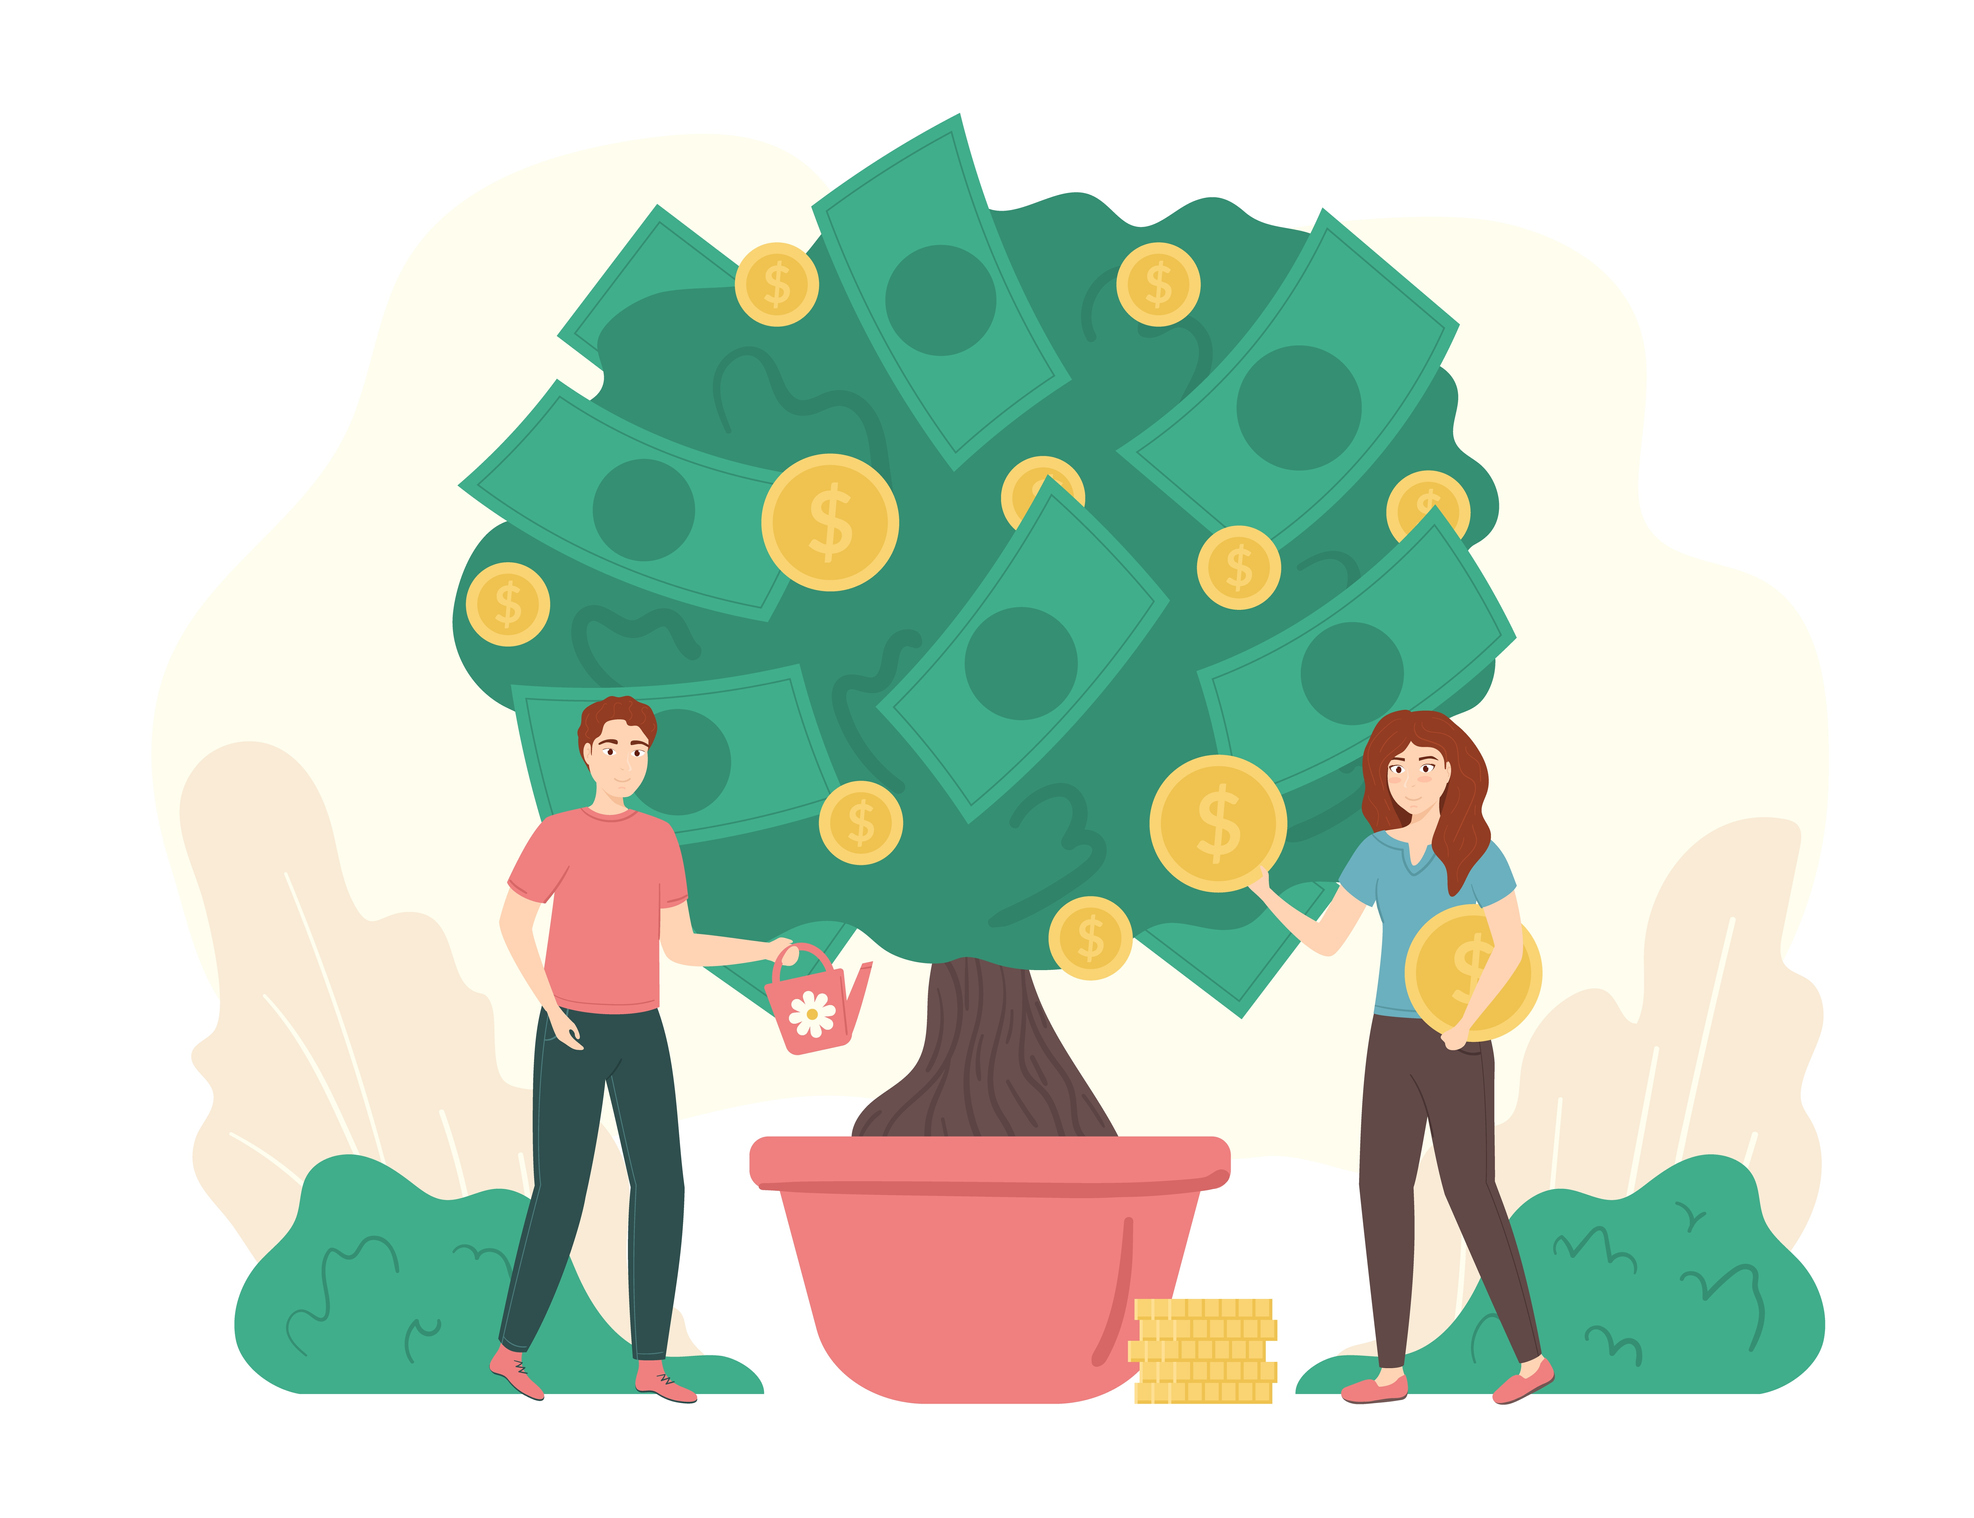 Man and woman watering a money tree with leaves made of cash and fruit made of money